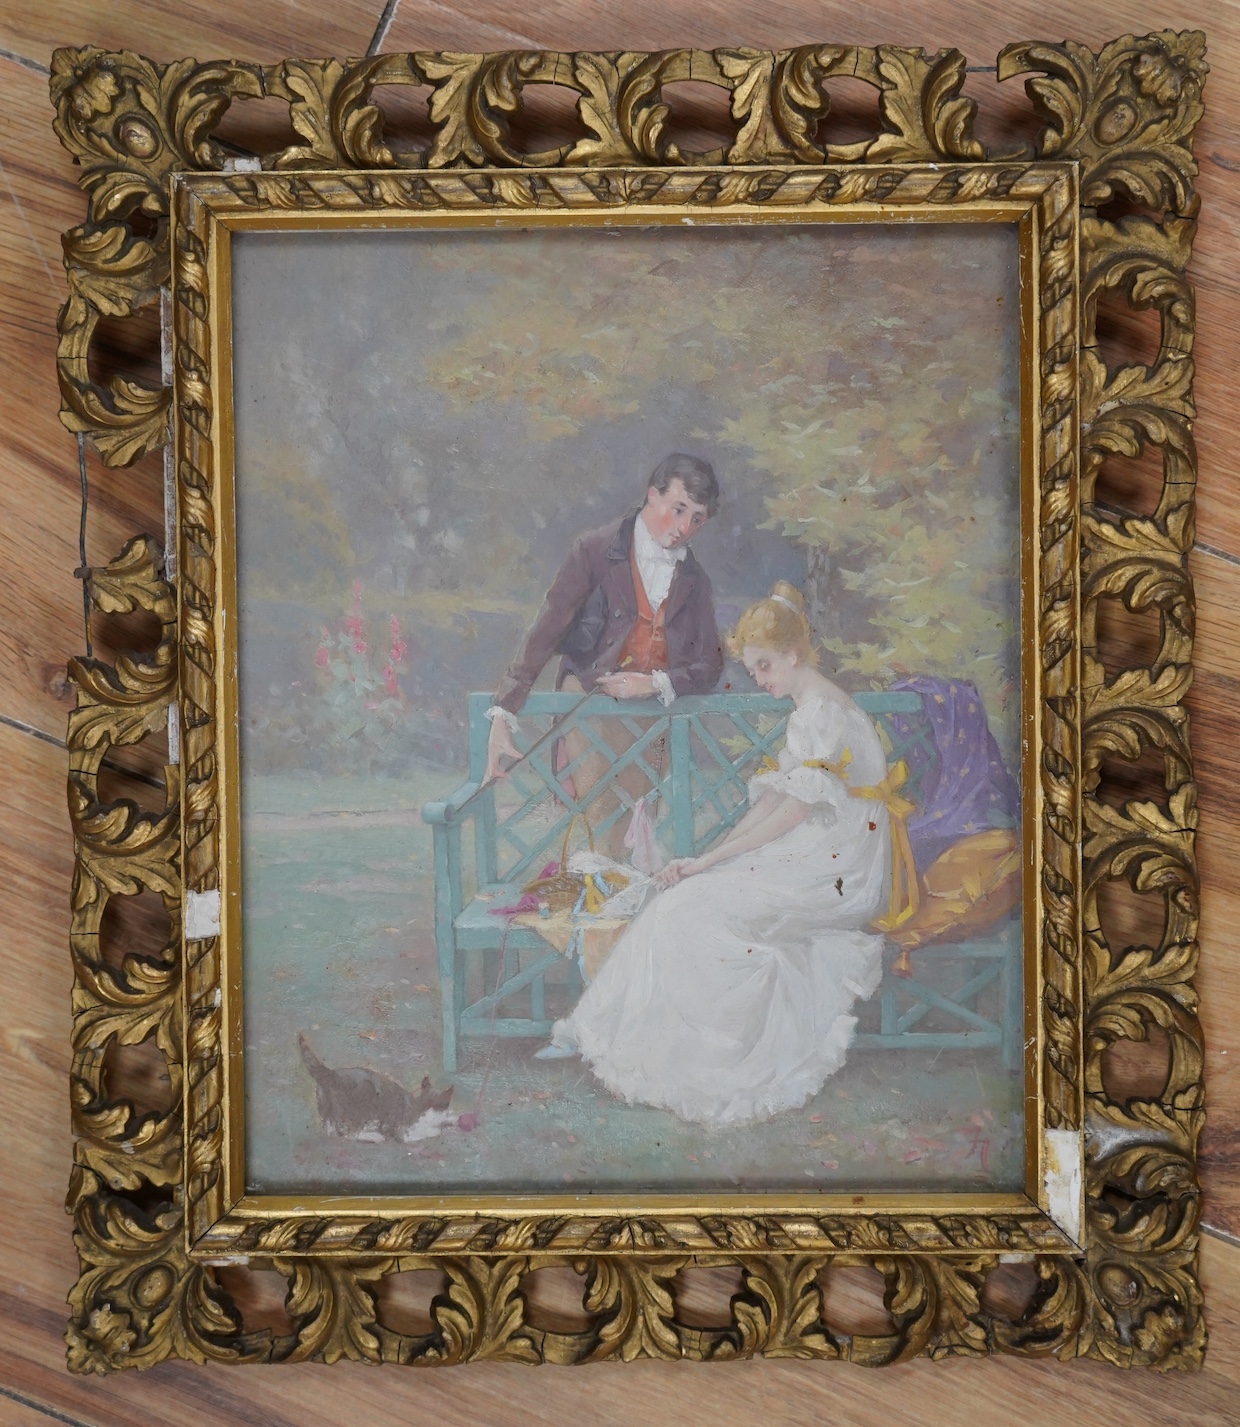 Monog, oil, 'What Will she Say', monogrammed, 24.5 x 19cm, ornate gilt framed. Condition - fair, losses to the frame